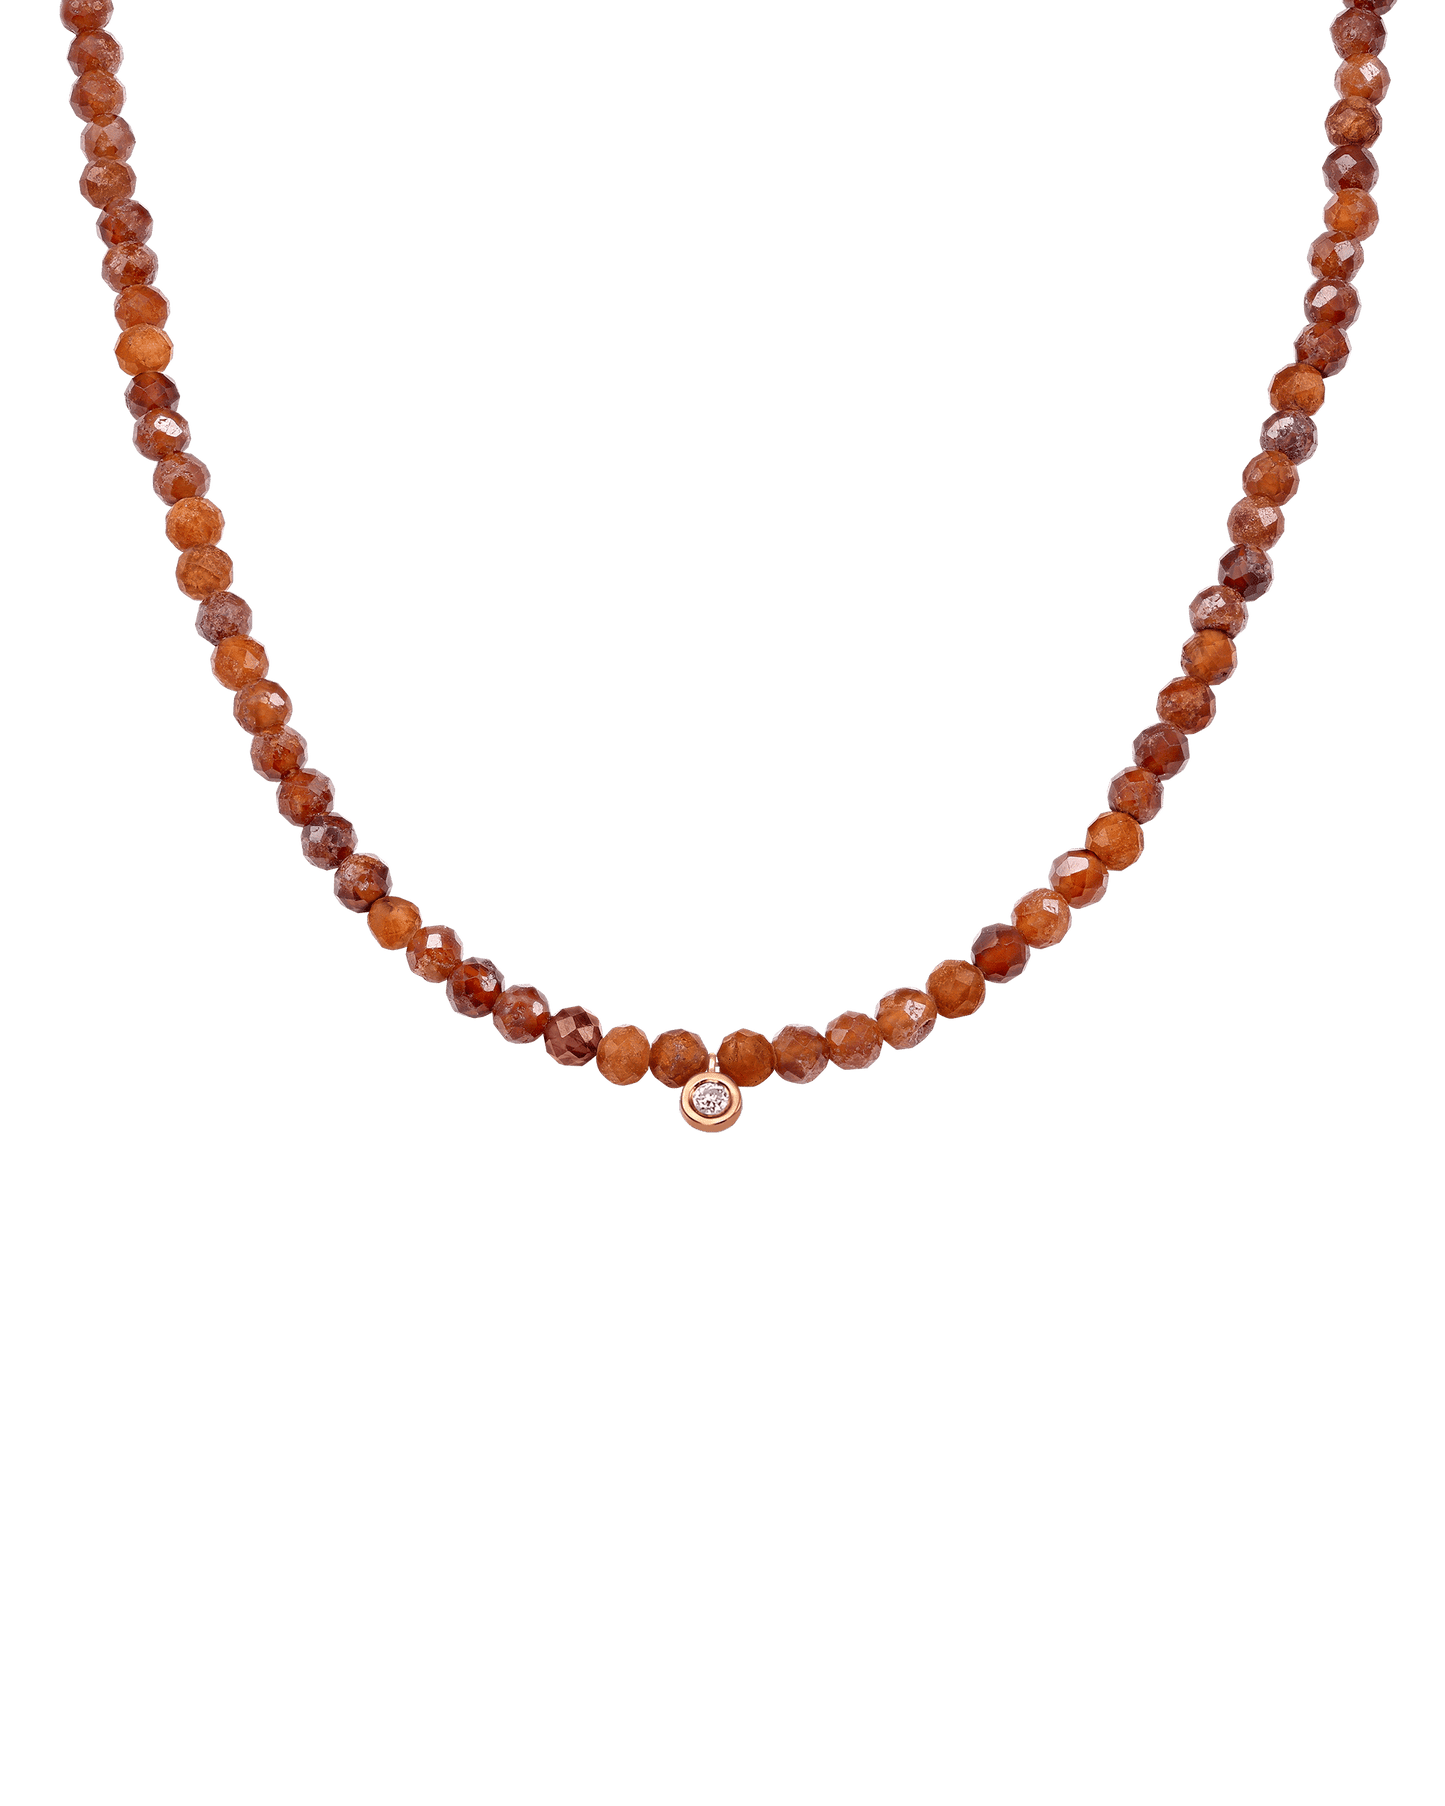 The Gemstone & Diamond Necklace - 14K Rose Gold Necklaces 14K Solid Gold Natural Garnet Small: 0.03ct 14"